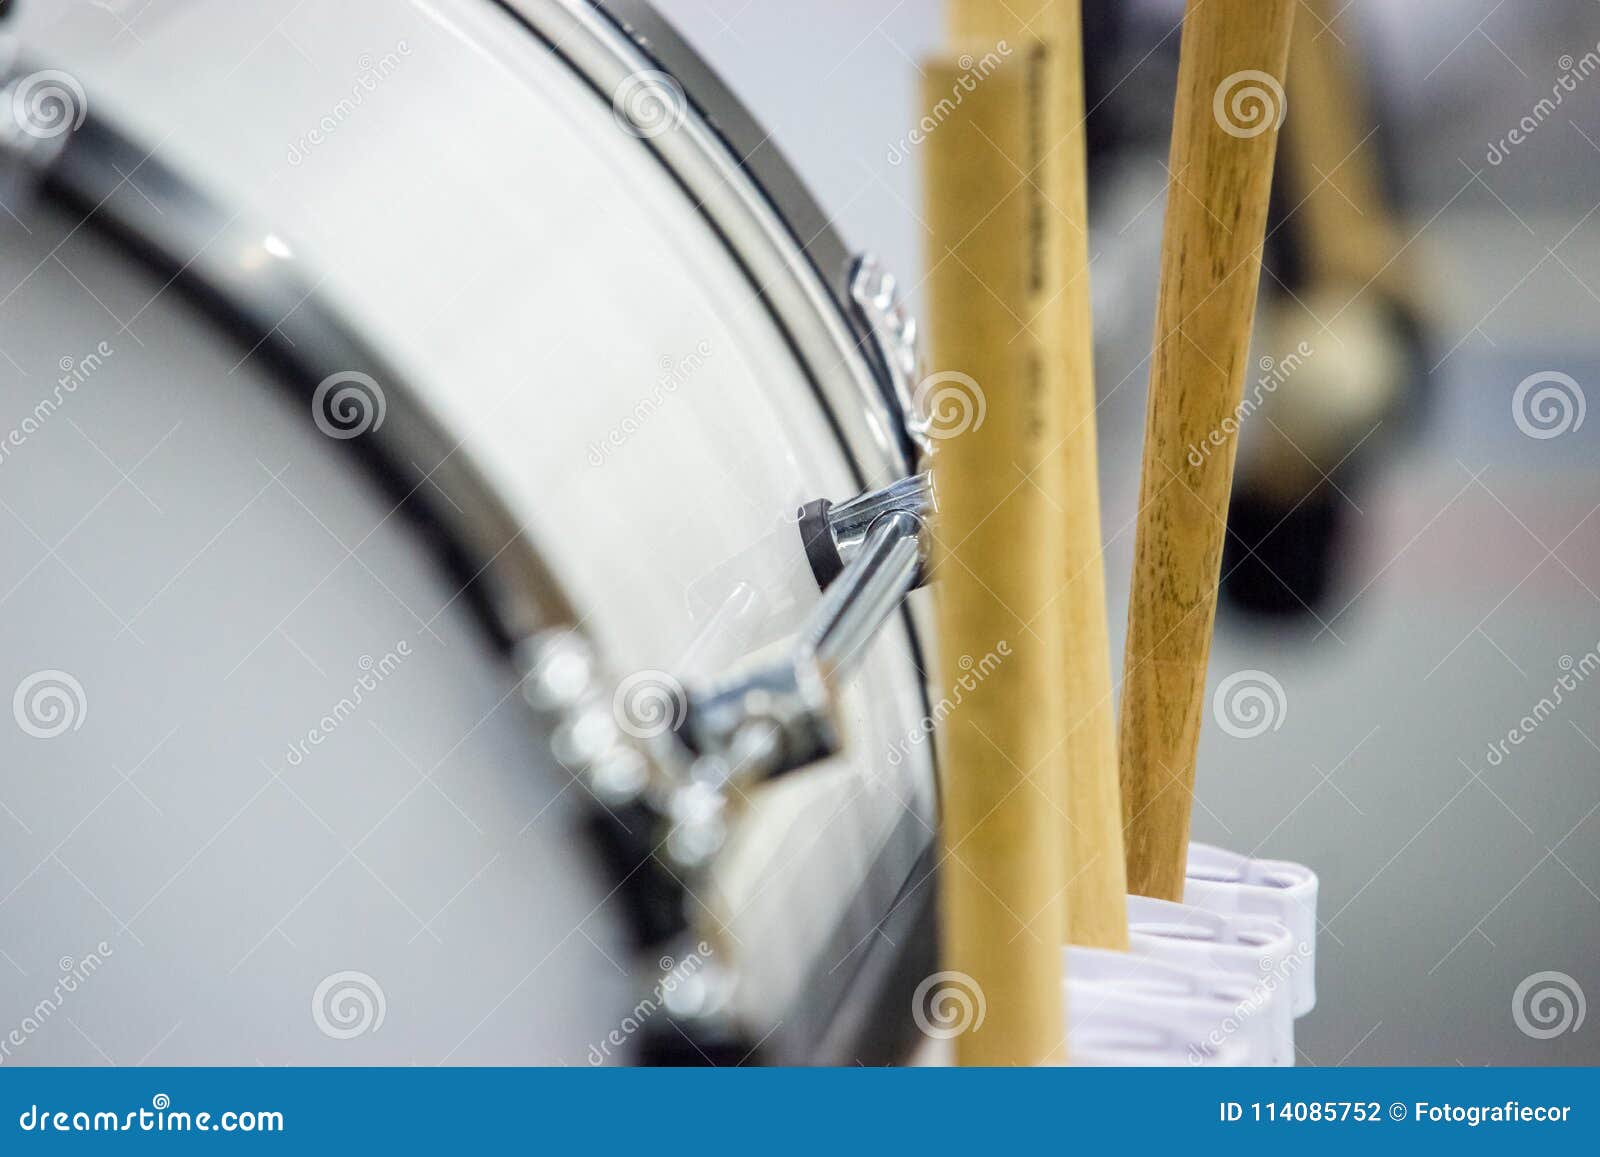 Bass drum sticks on dums stock photo. Image of roll - 114085752